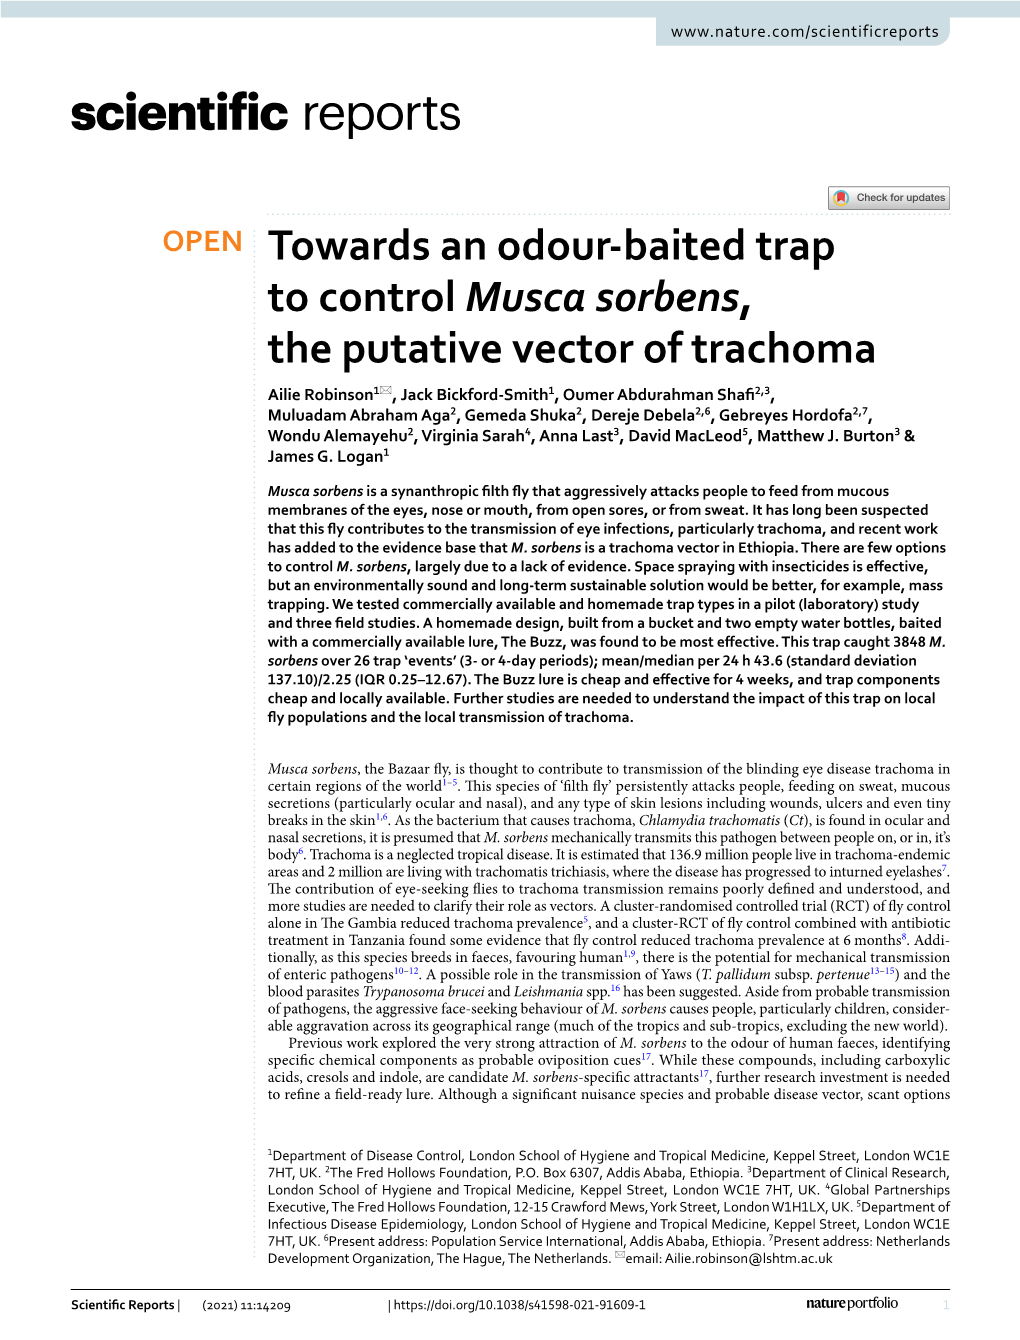 Towards an Odour-Baited Trap to Control Musca Sorbens, the Putative